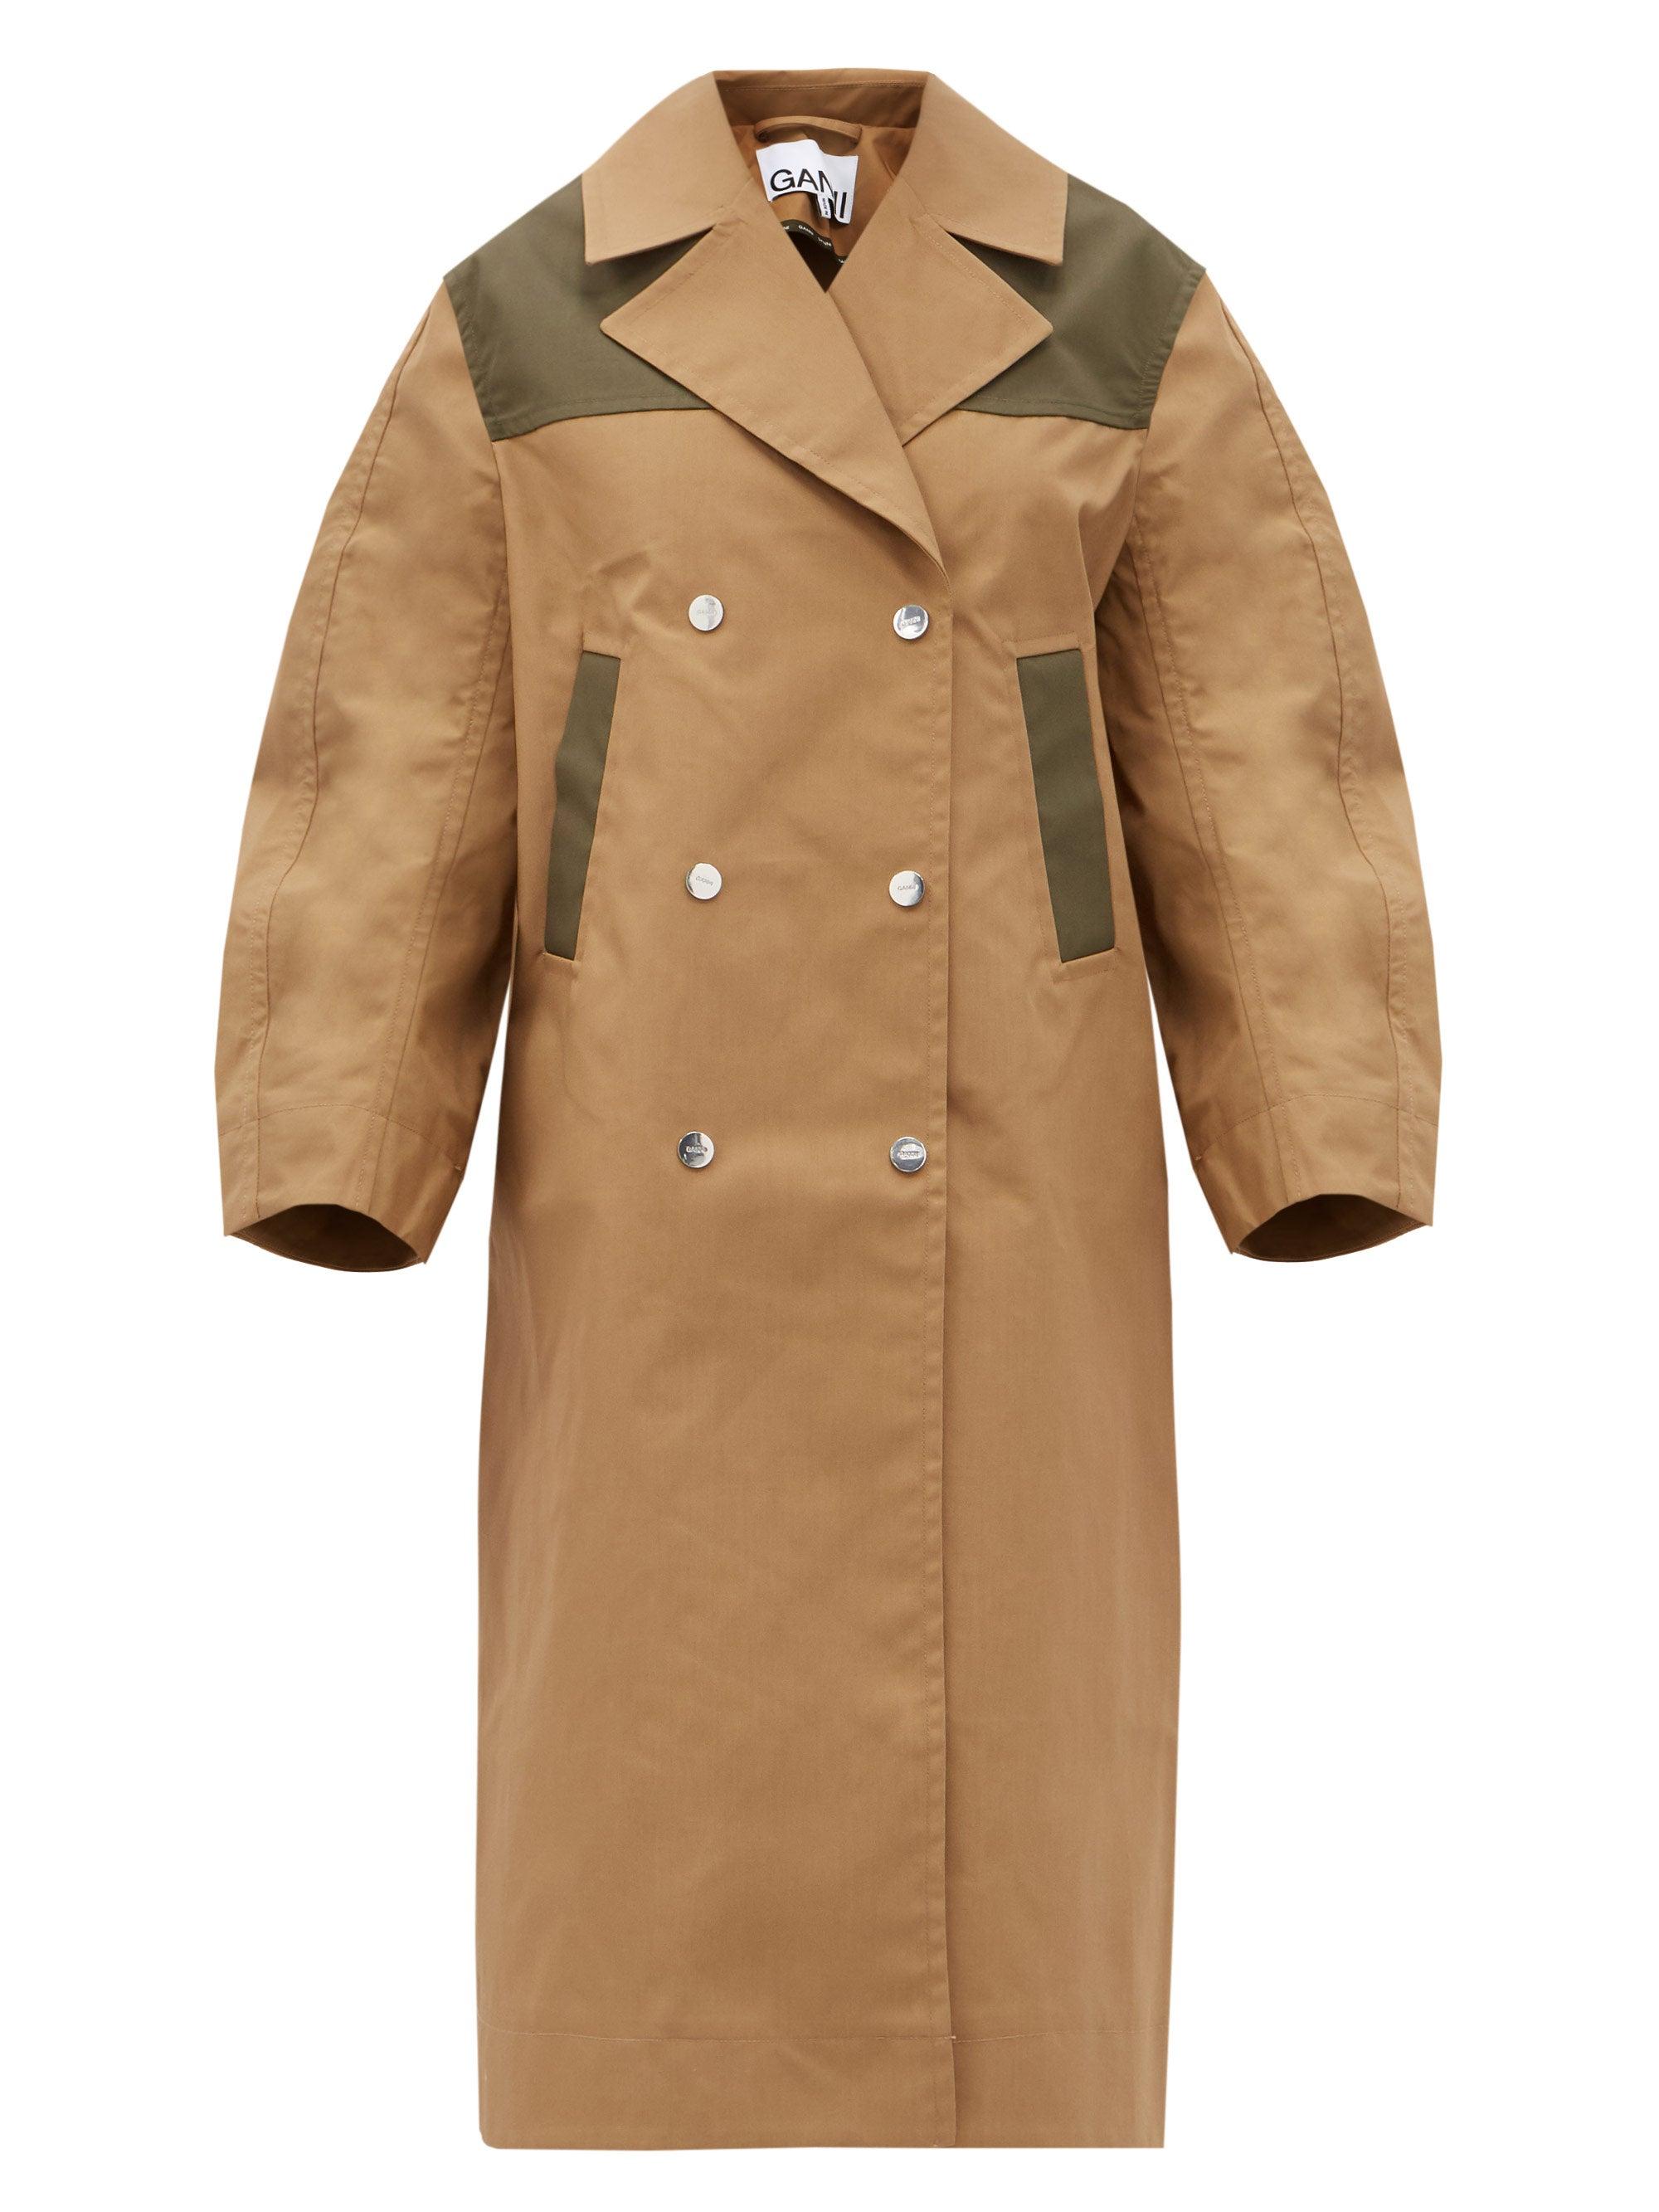 Ganni Double-breasted Cotton-blend Twill Coat in Beige (Natural) - Lyst